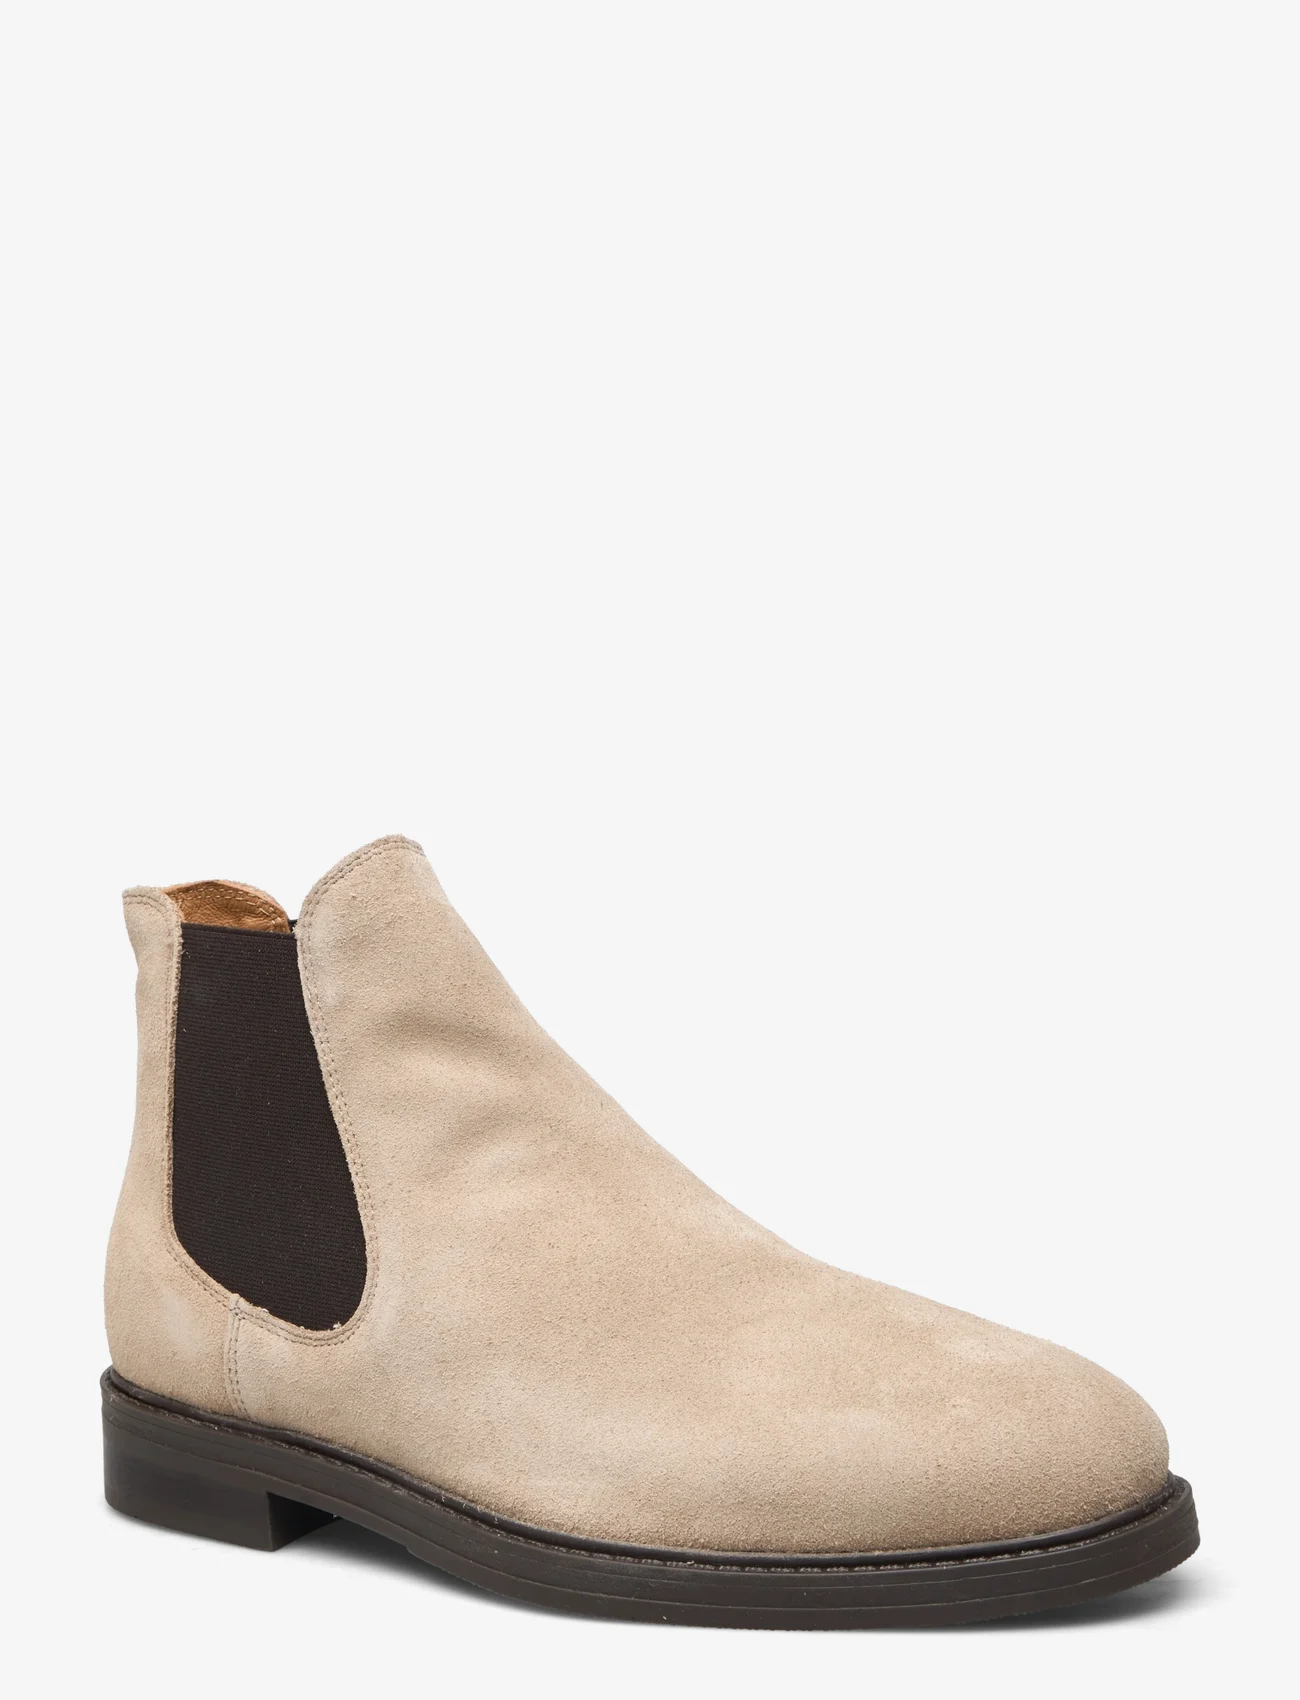 Selected Homme - SLHBLAKE SUEDE CHELSEA BOOT - mężczyźni - incense - 0